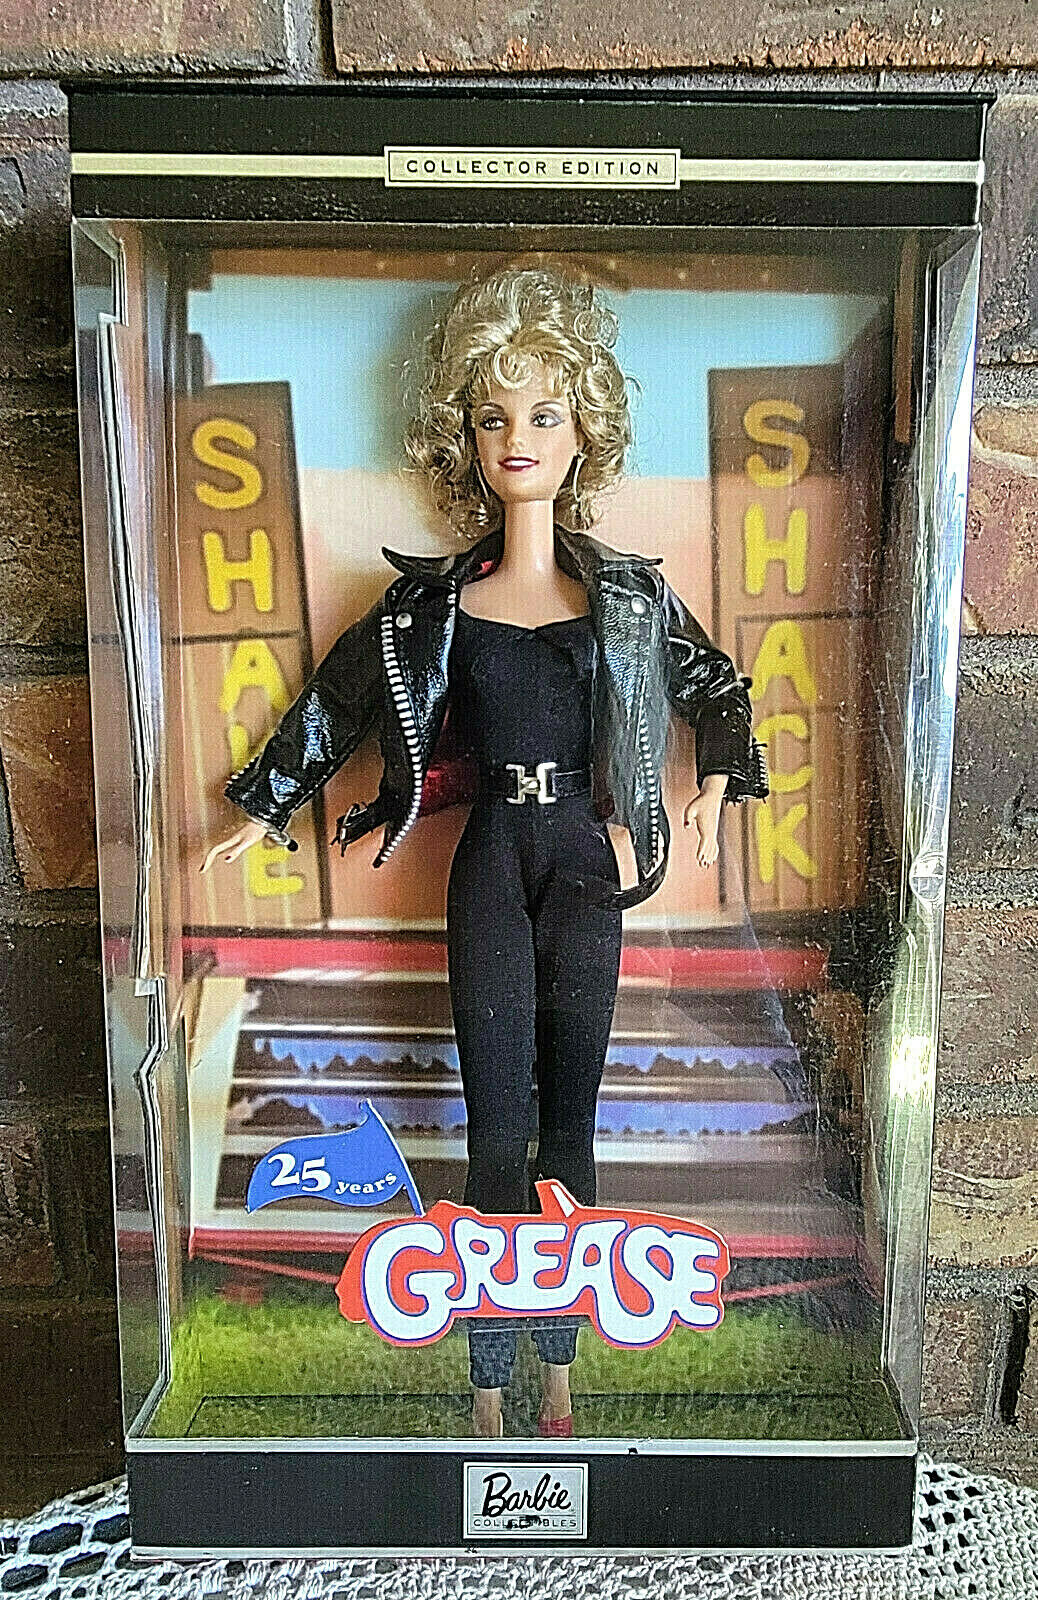 Collector's Edition (25 years) GREASE MOVIE BARBIE, Sandy - 2003 NRFB